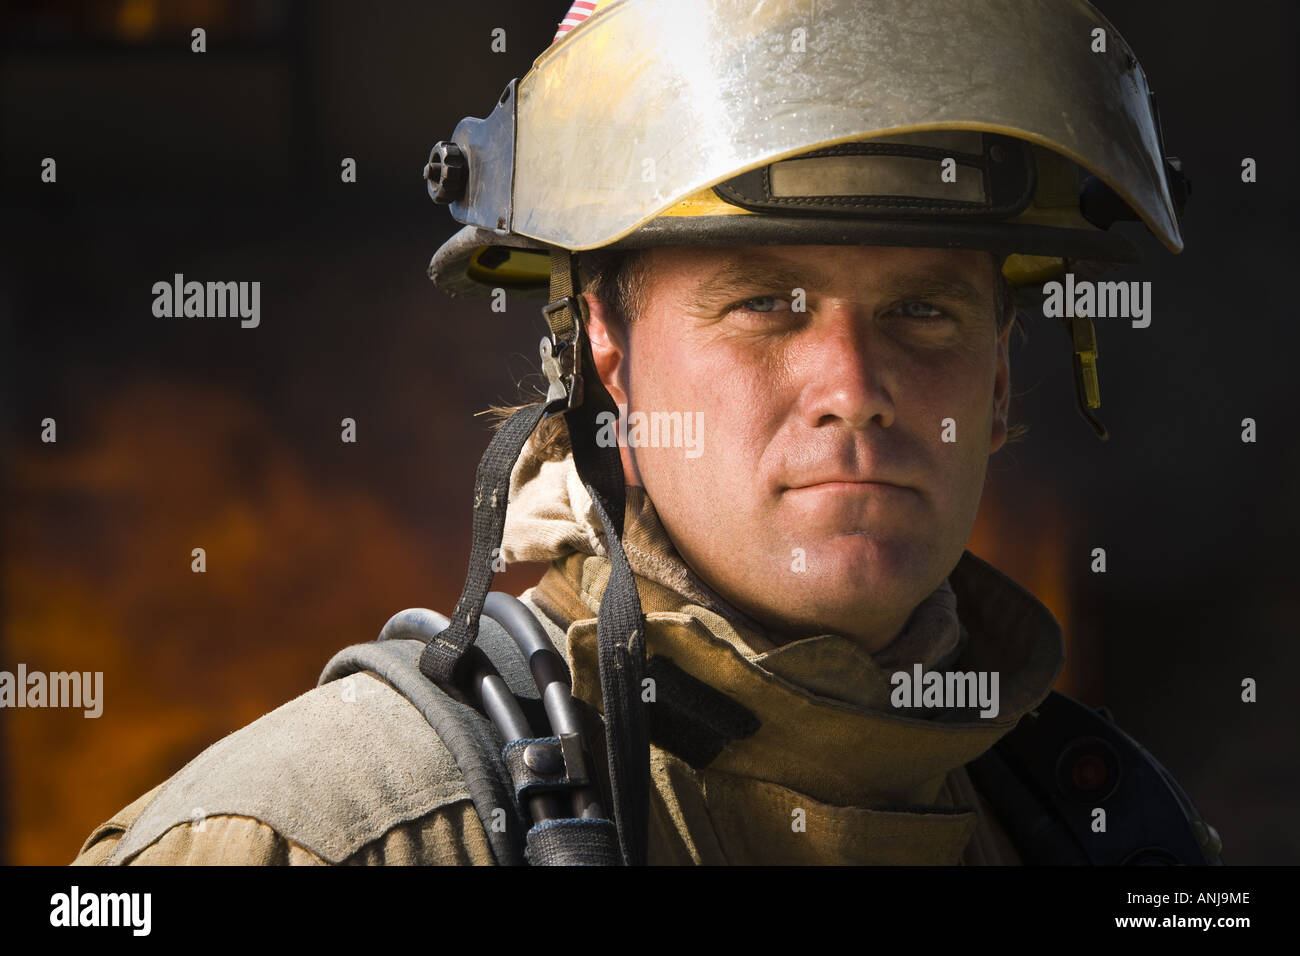 Close up of a firefighter Stock Photo